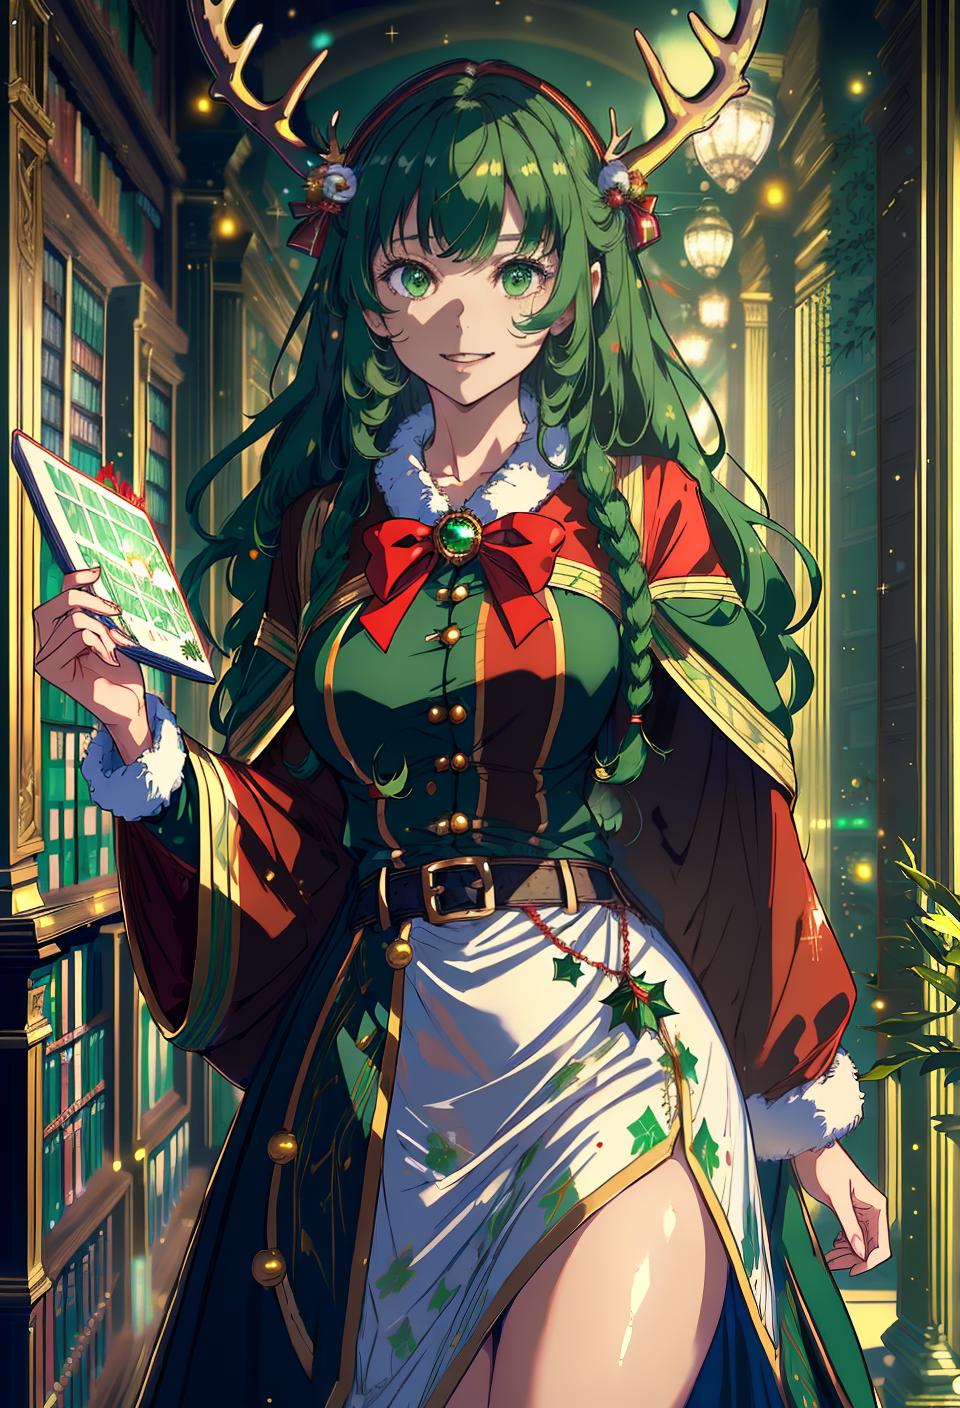  ((trending, highres, masterpiece, cinematic shot)), 1girl, mature, female Christmas outfit, large, library scene, very long curly blue hair, asymmetrical bangs, narrow green eyes, energetic personality, happy expression, antlers, tanned skin, magical, lucky